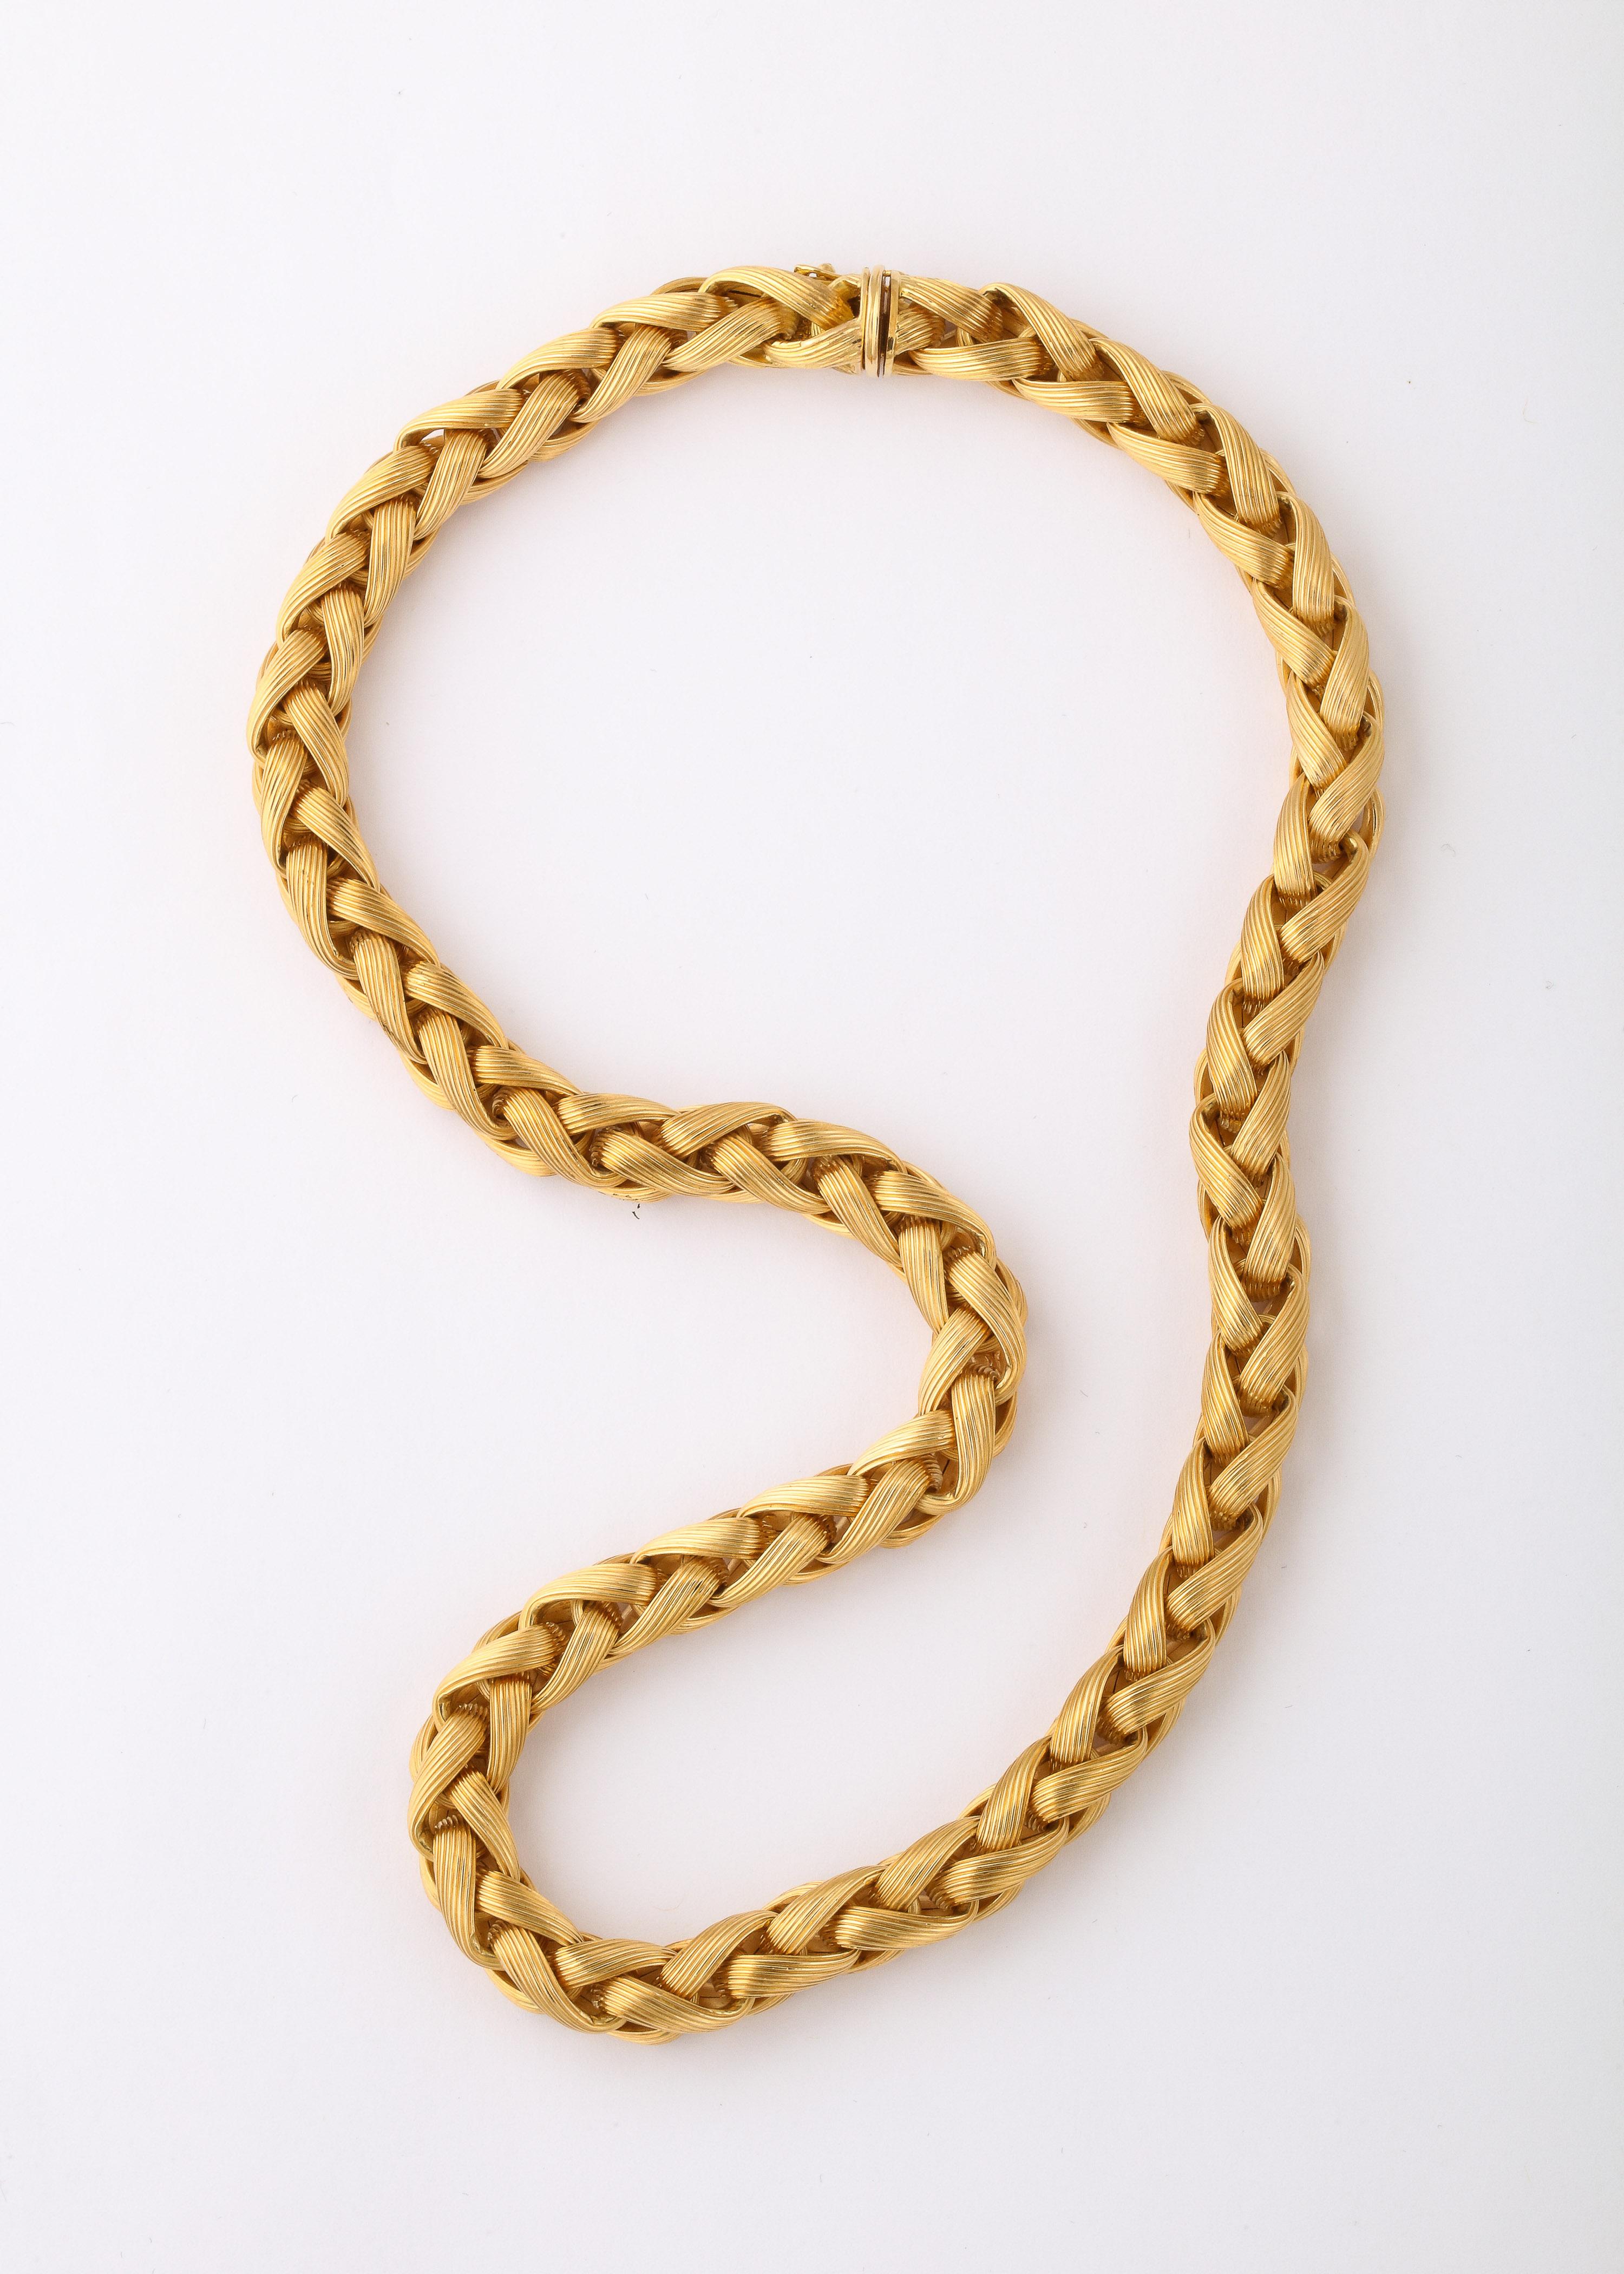 18 Karat Braided Link Necklace W Striated Links In Excellent Condition For Sale In New York, NY